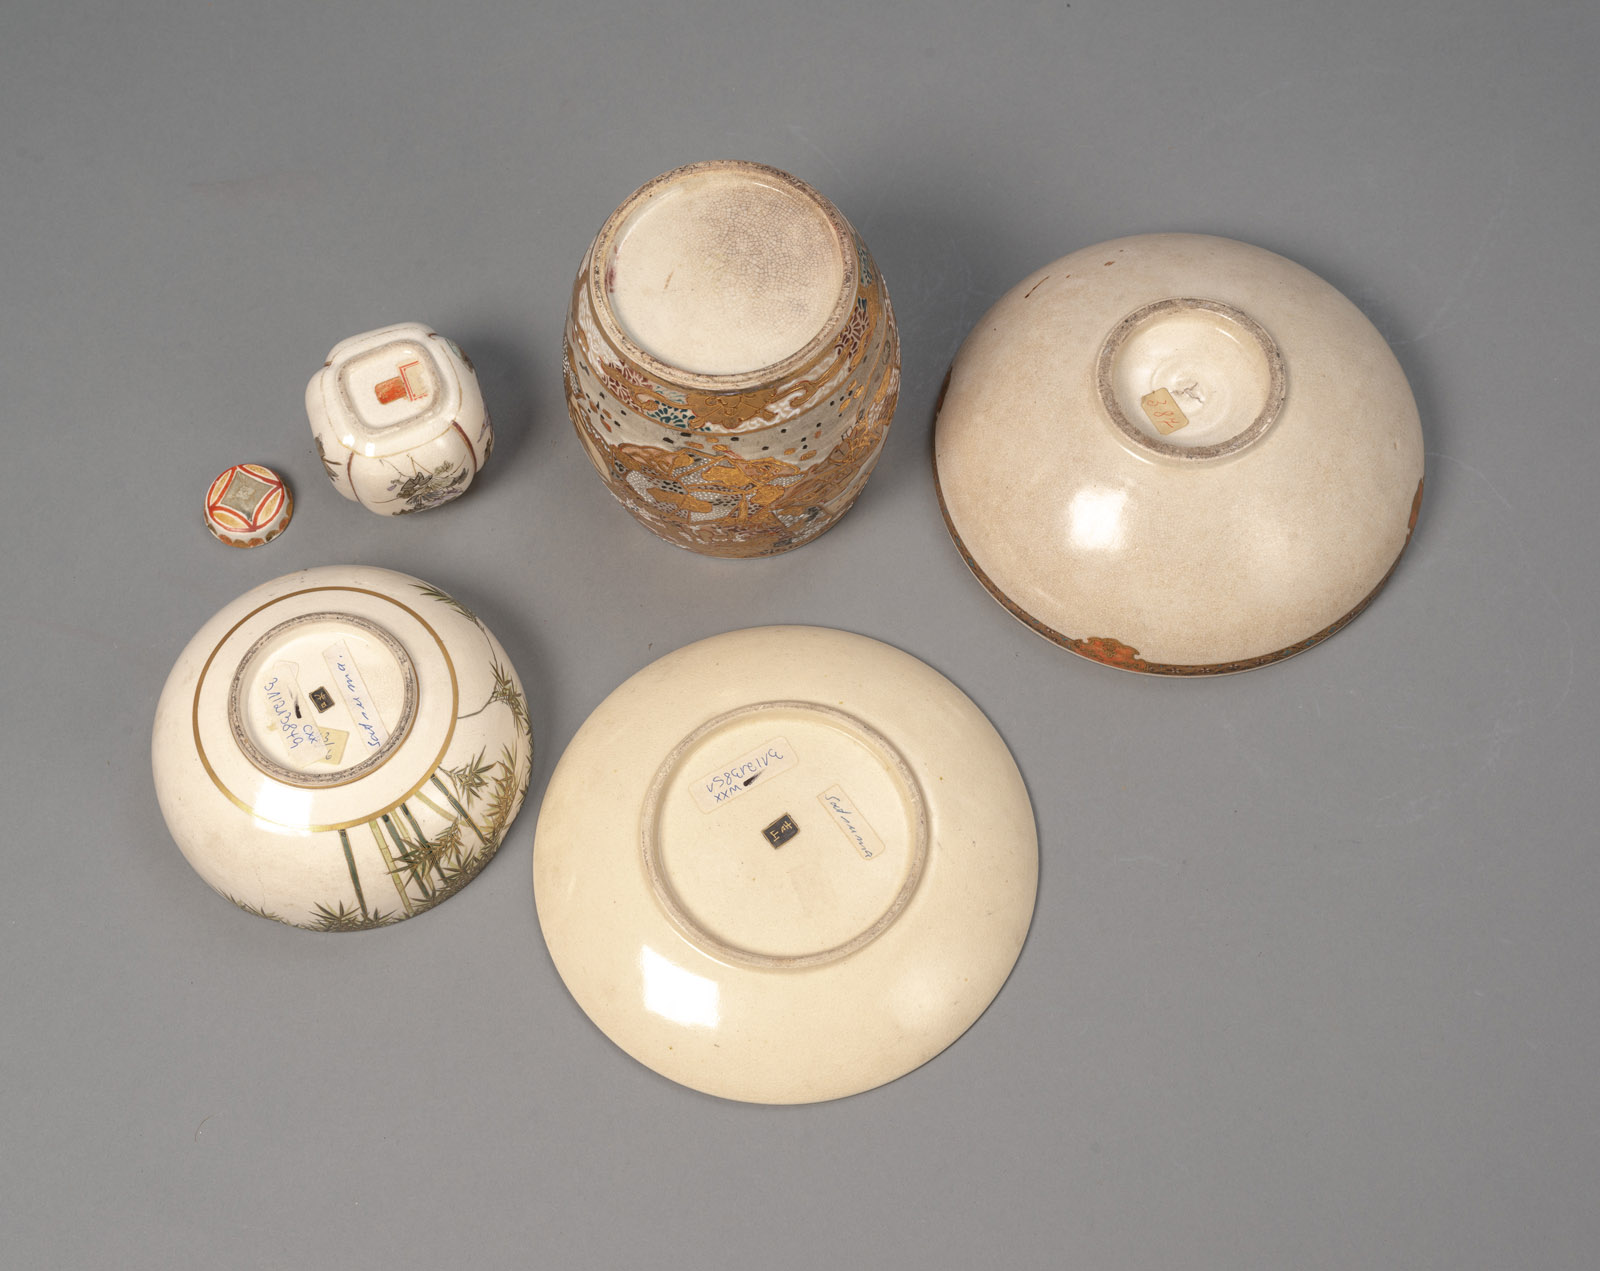 FÜNF SATSUMA STONEWARE: TWO BOWLS, A DISH, A VASE AND A SMALL LIDDED VASE - Image 3 of 3